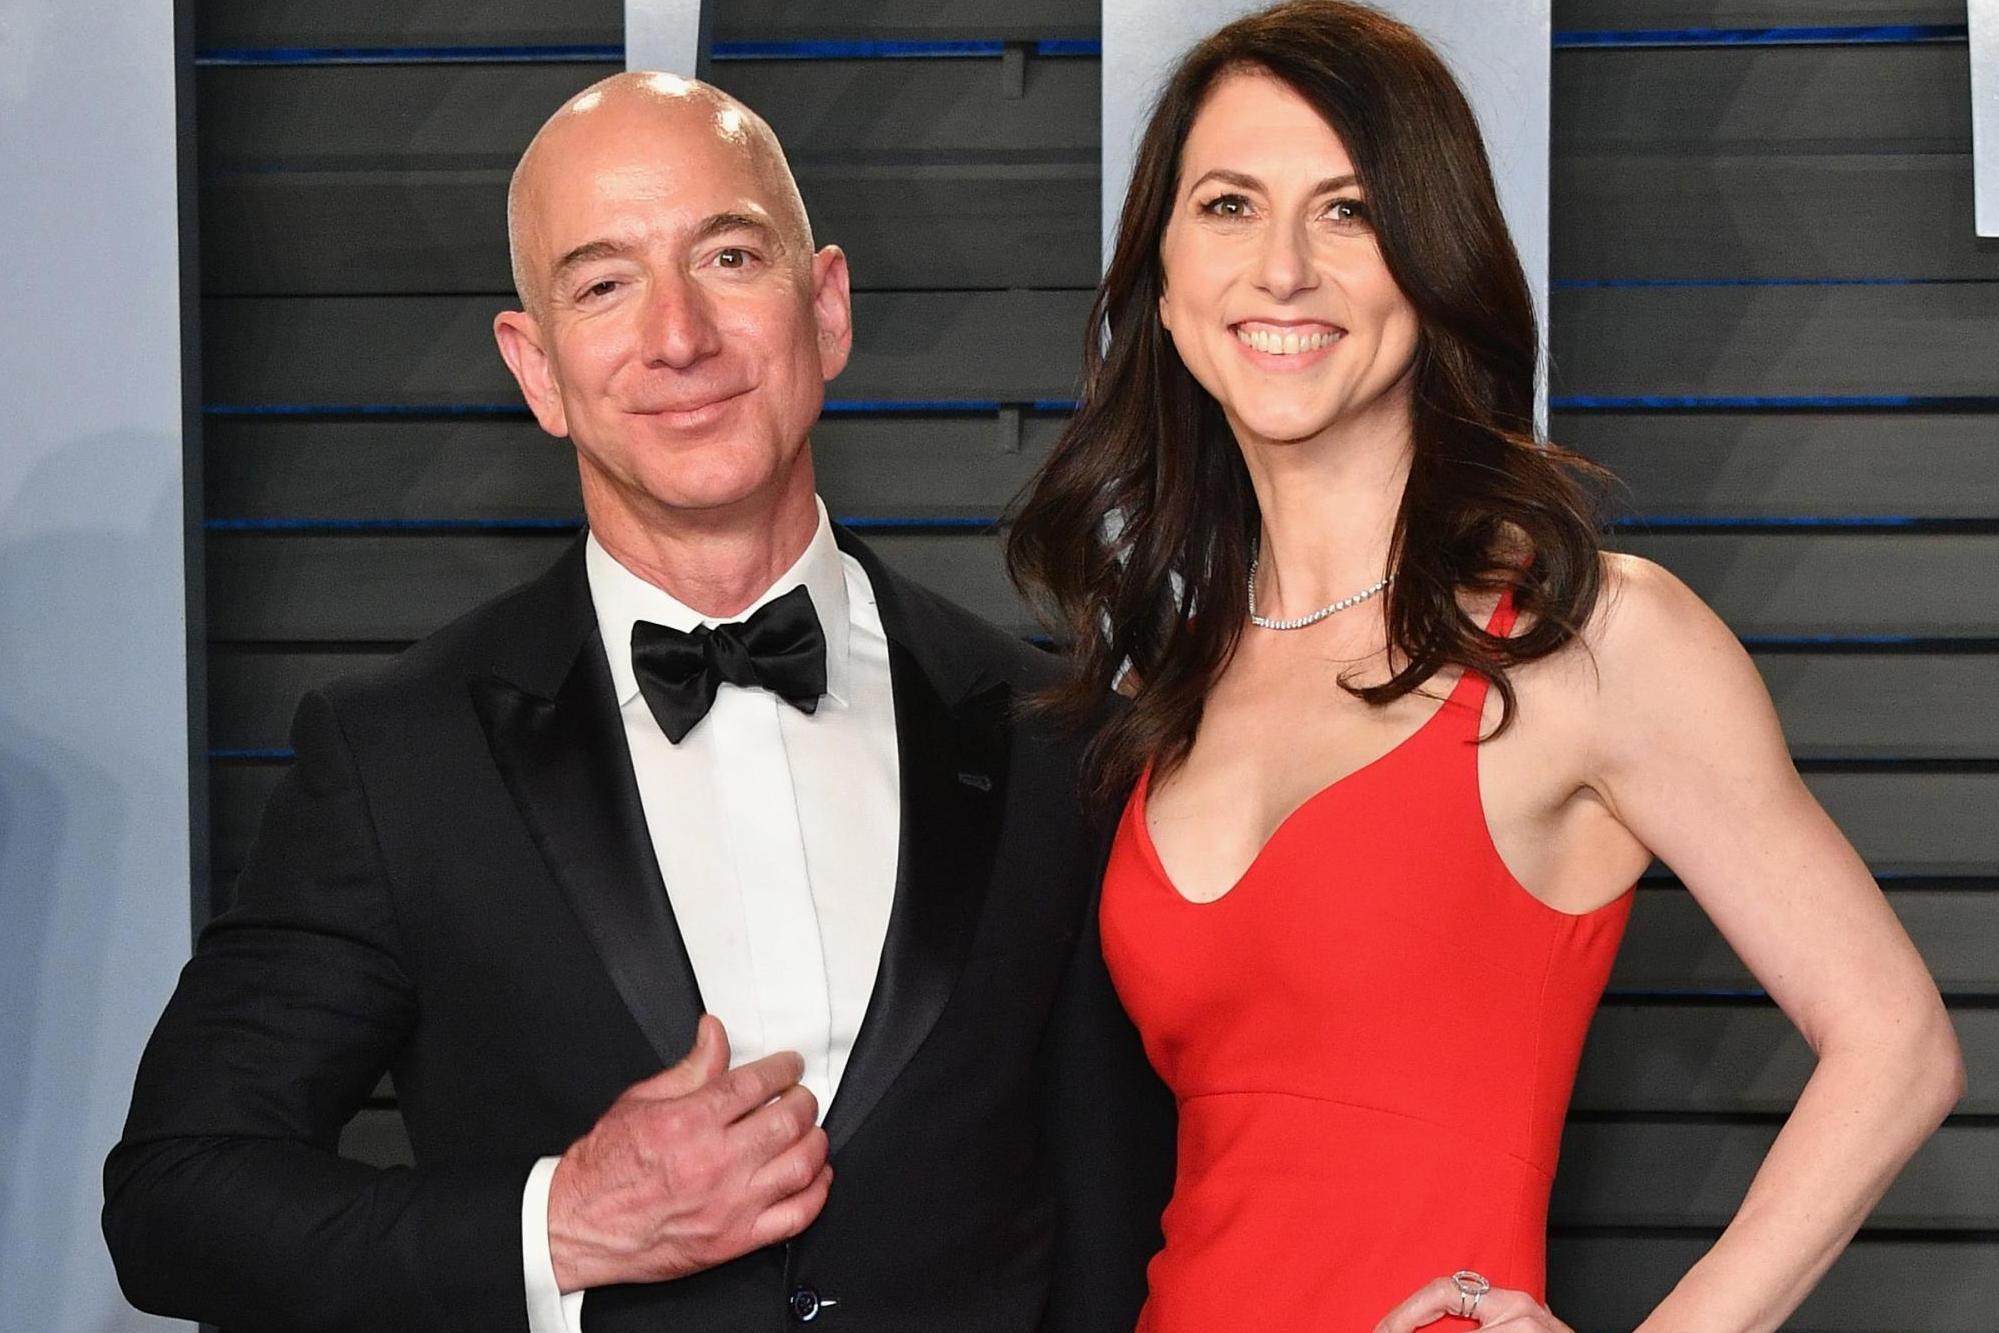 MacKenzie Bezos announces she will be giving half her fortune away (Getty)